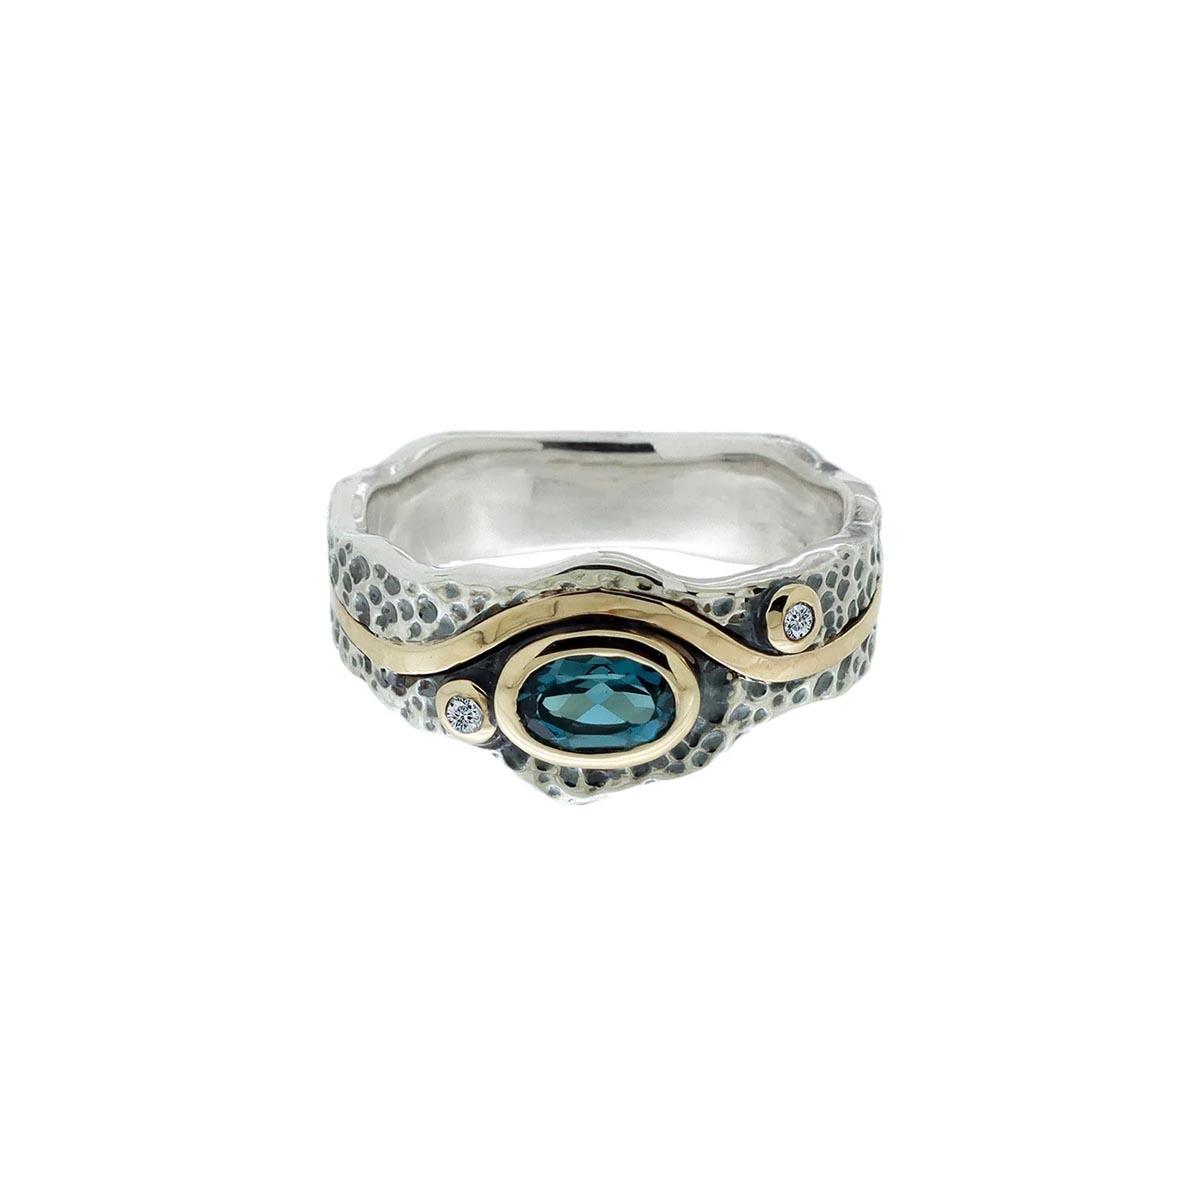 Keith Jack Rocks n Rivers Oval London Blue Topaz Ring in Sterling Silver and 10kt Yellow Gold with Cubic Zirconia (size 7)